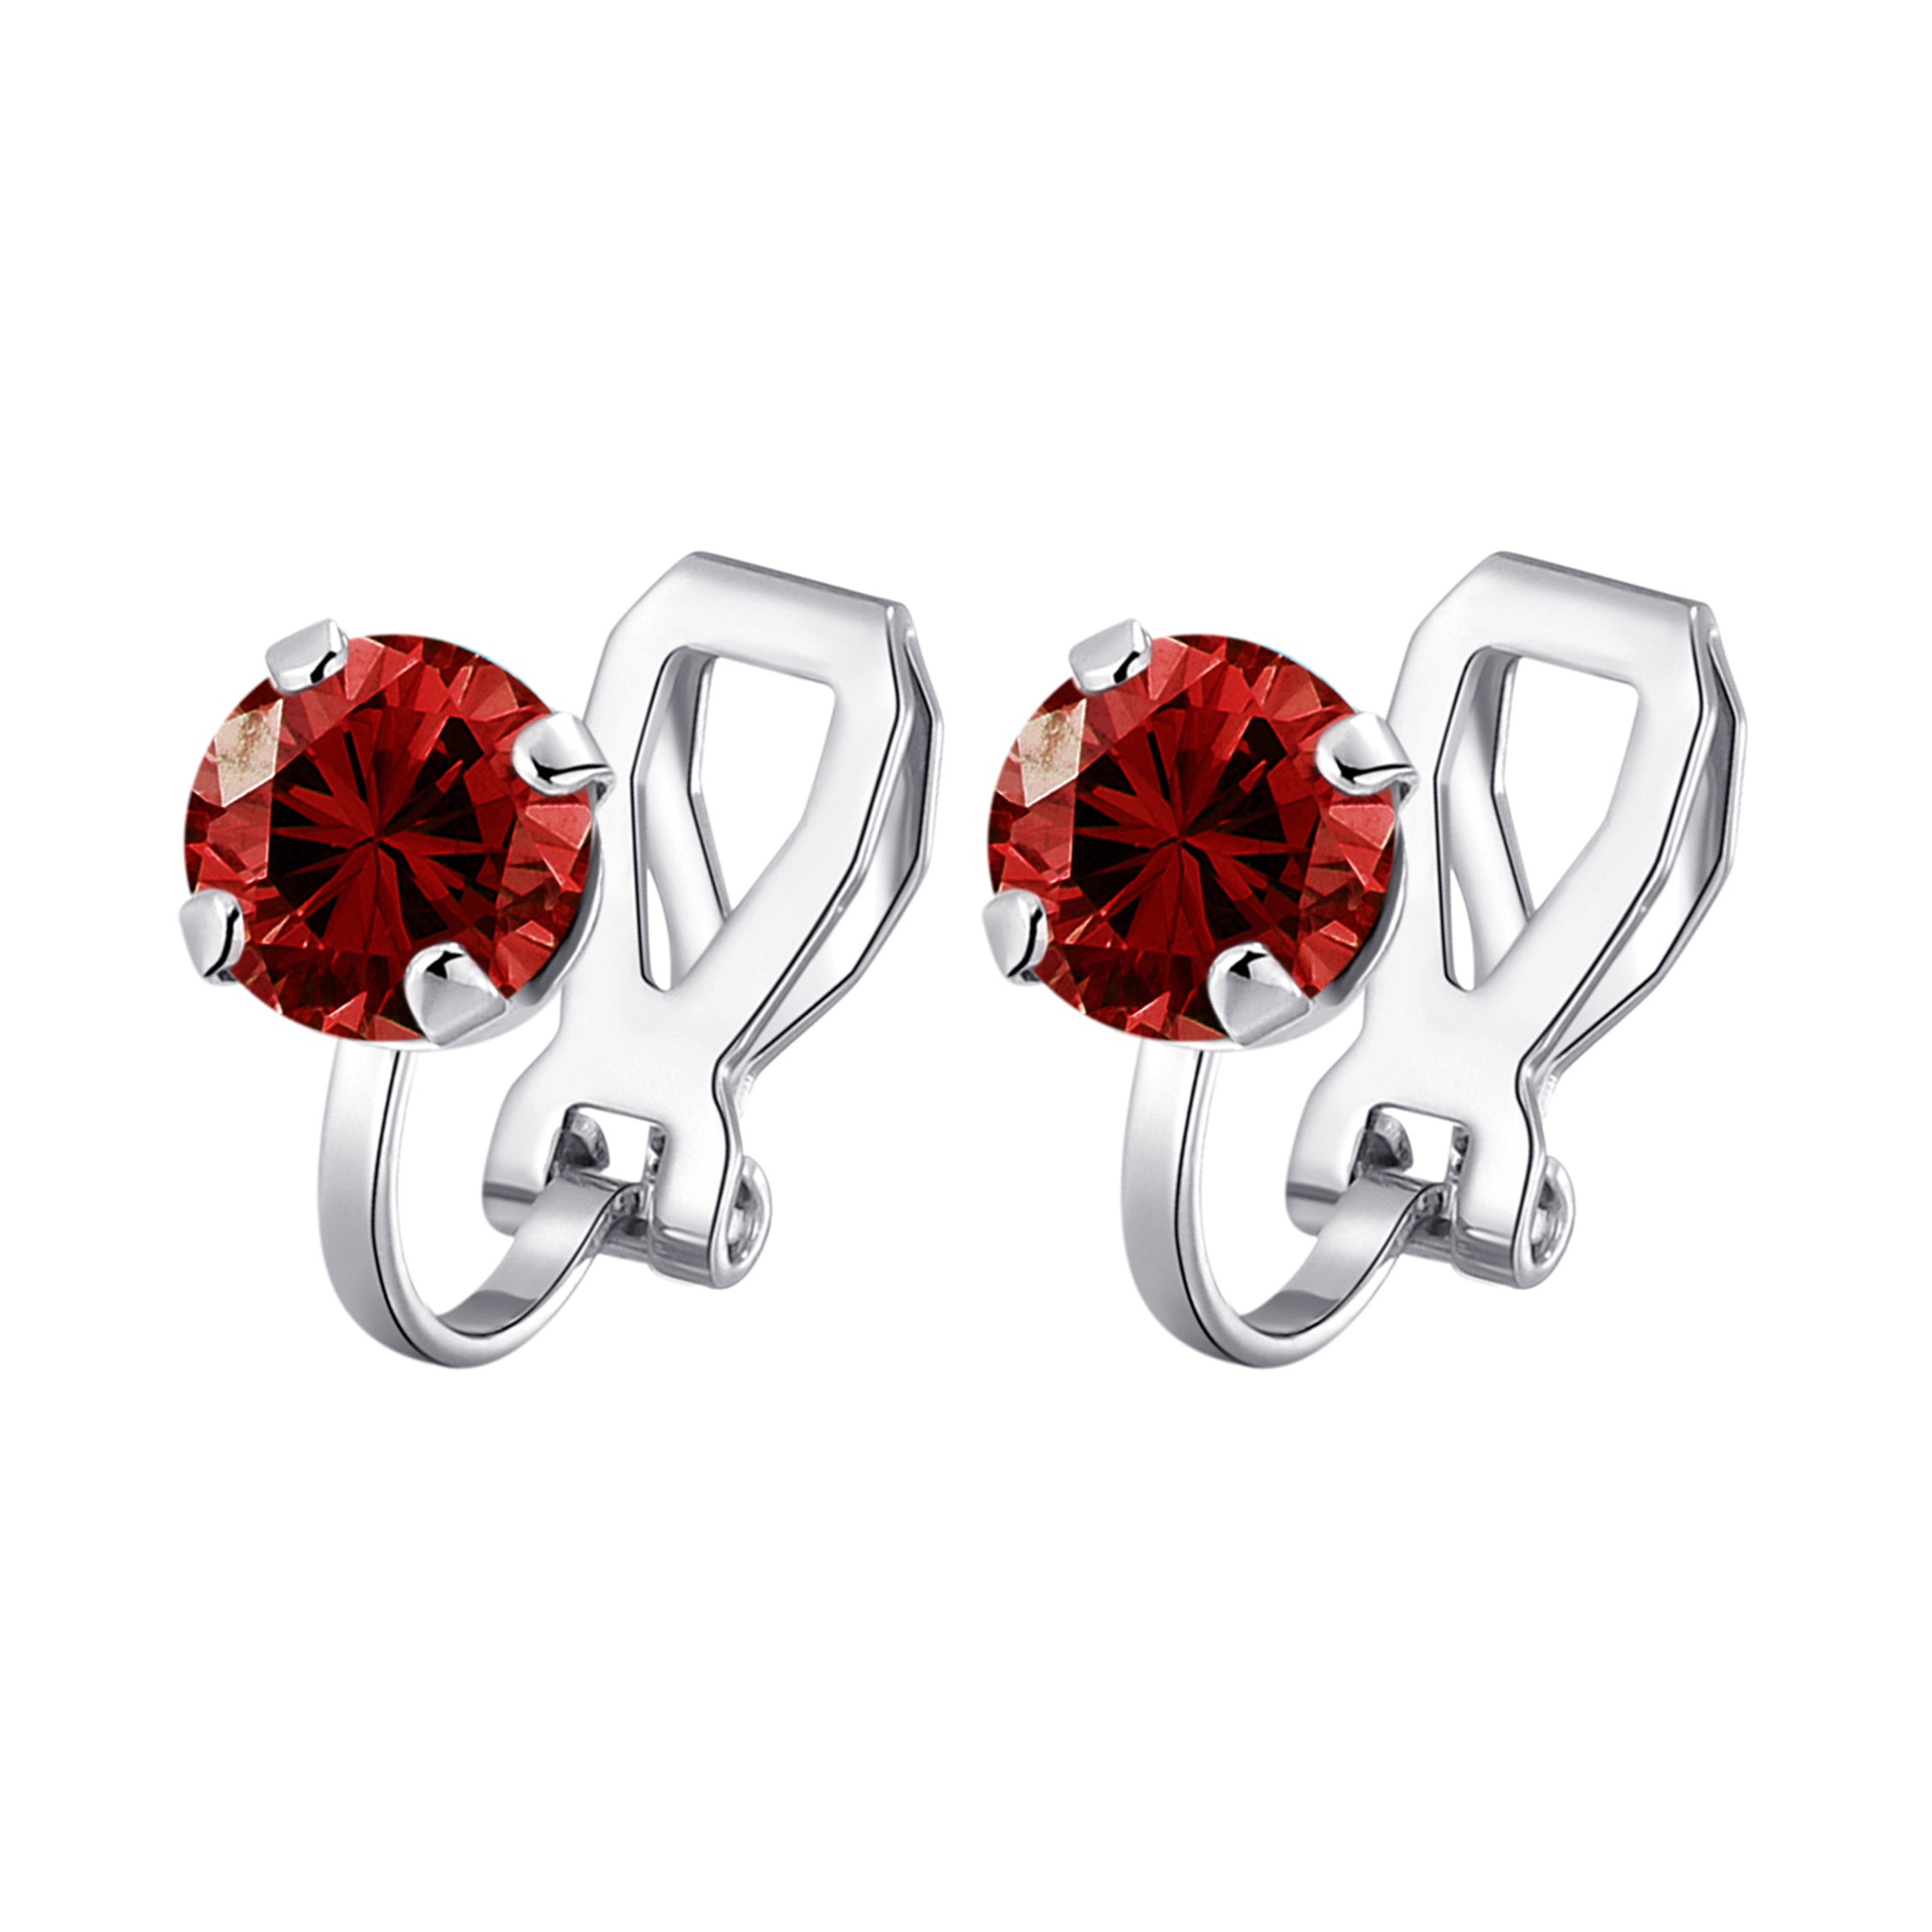 Dark Red Crystal Clip On Earrings Created with Zircondia® Crystals by Philip Jones Jewellery